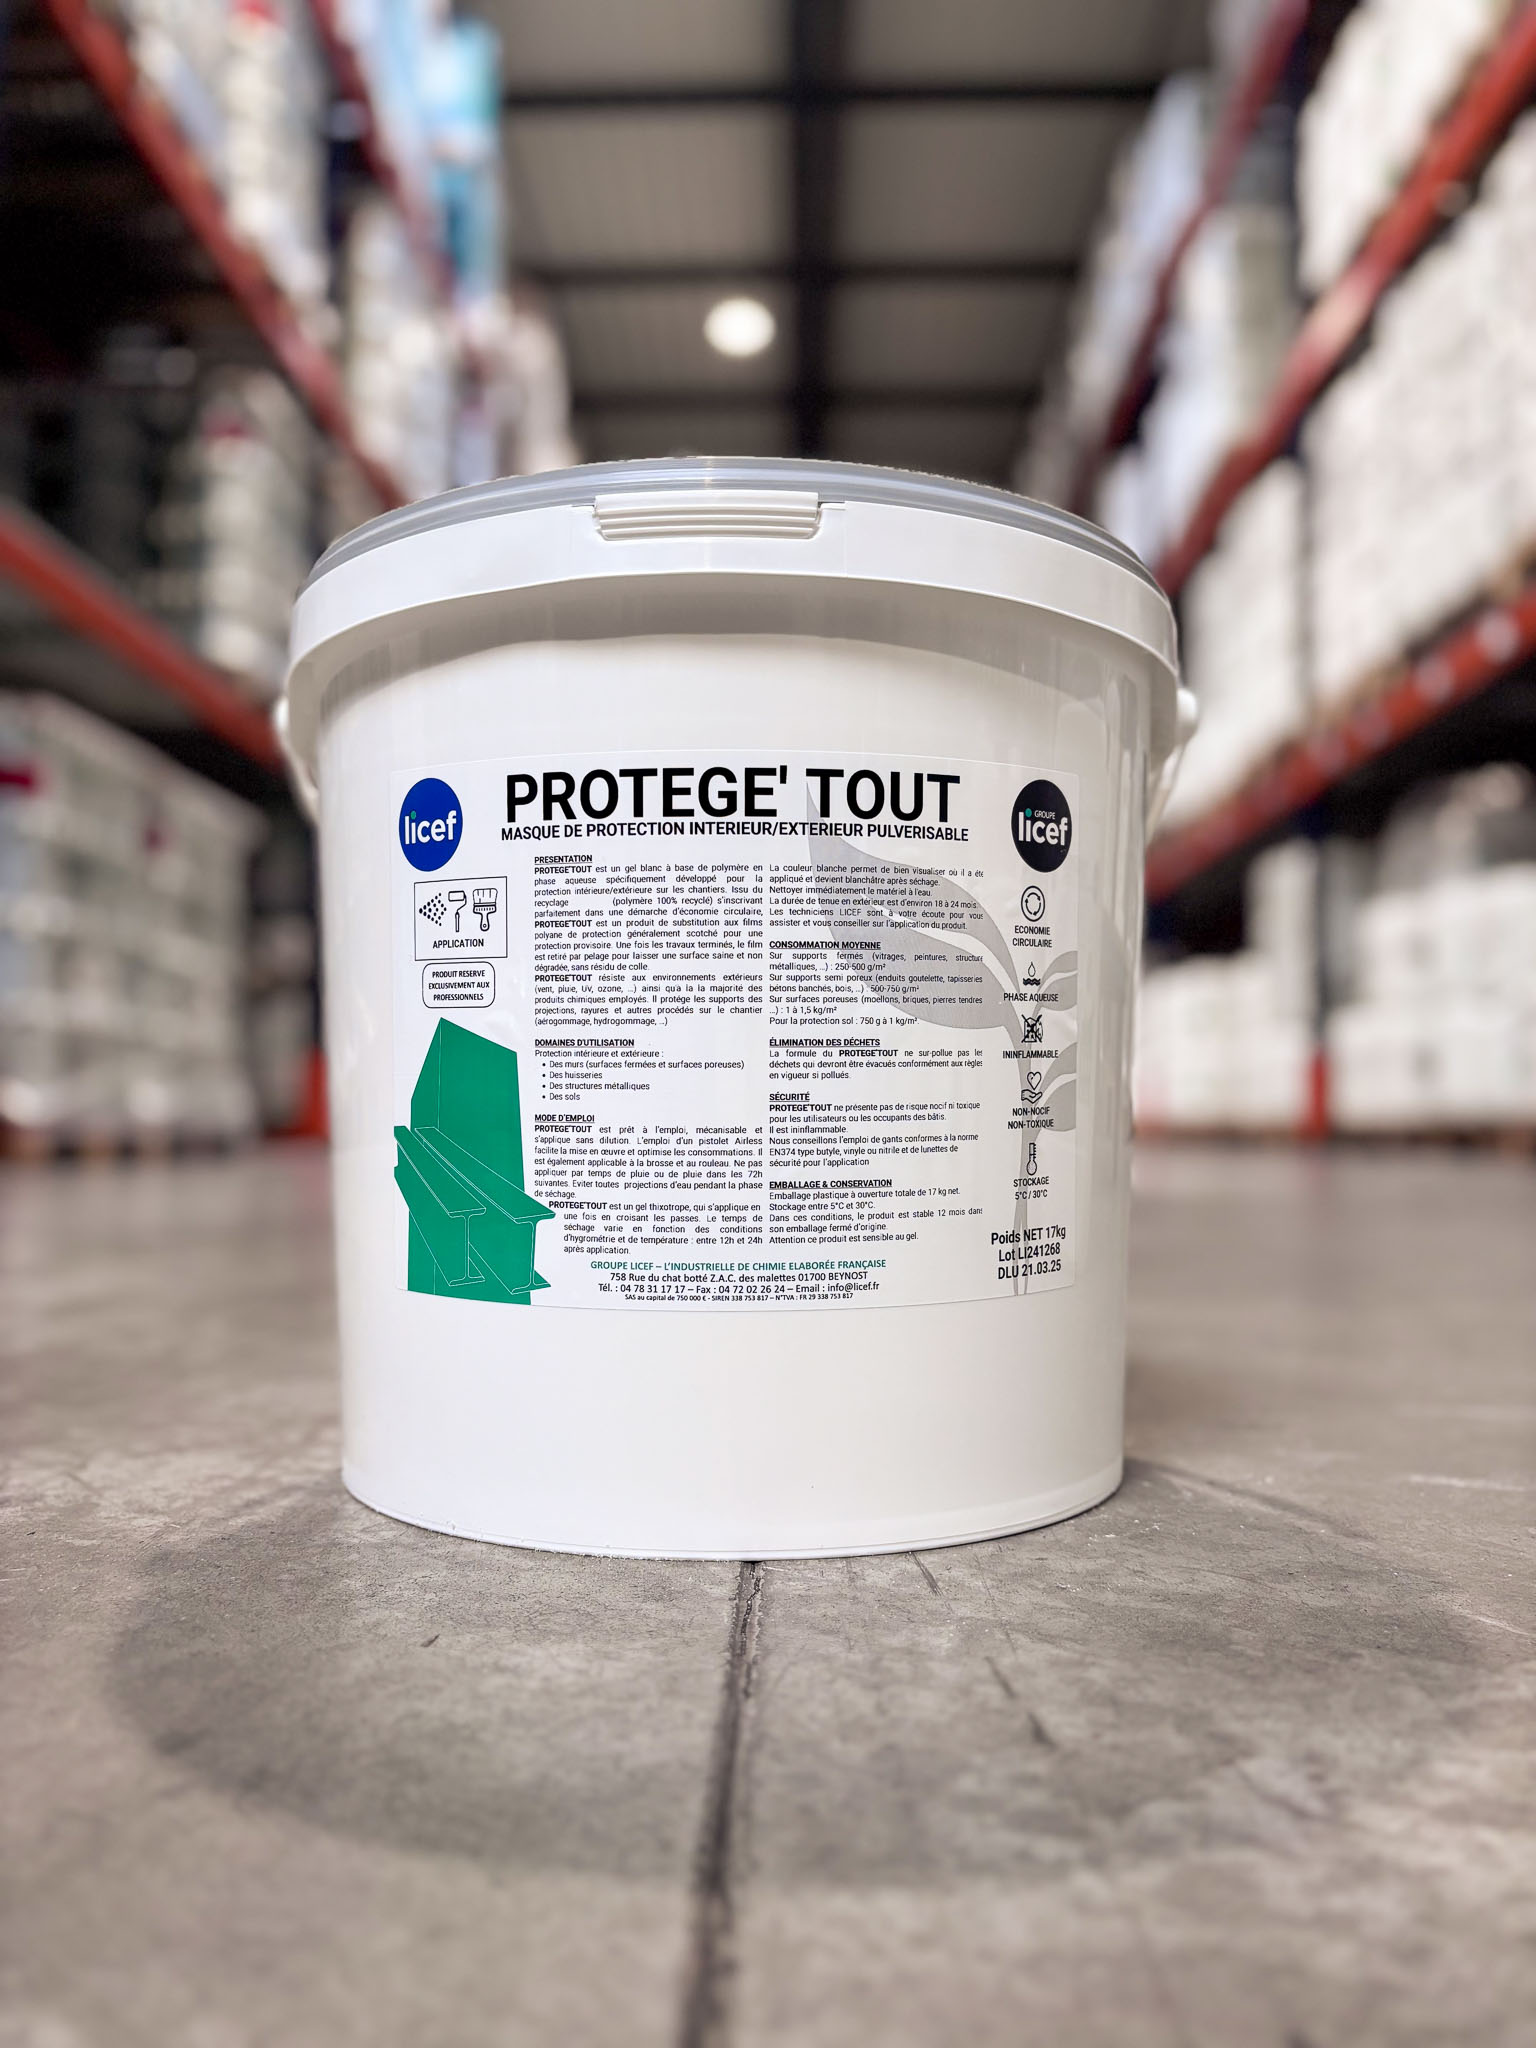 PROTEGE’ TOUT – Gamme LICEF